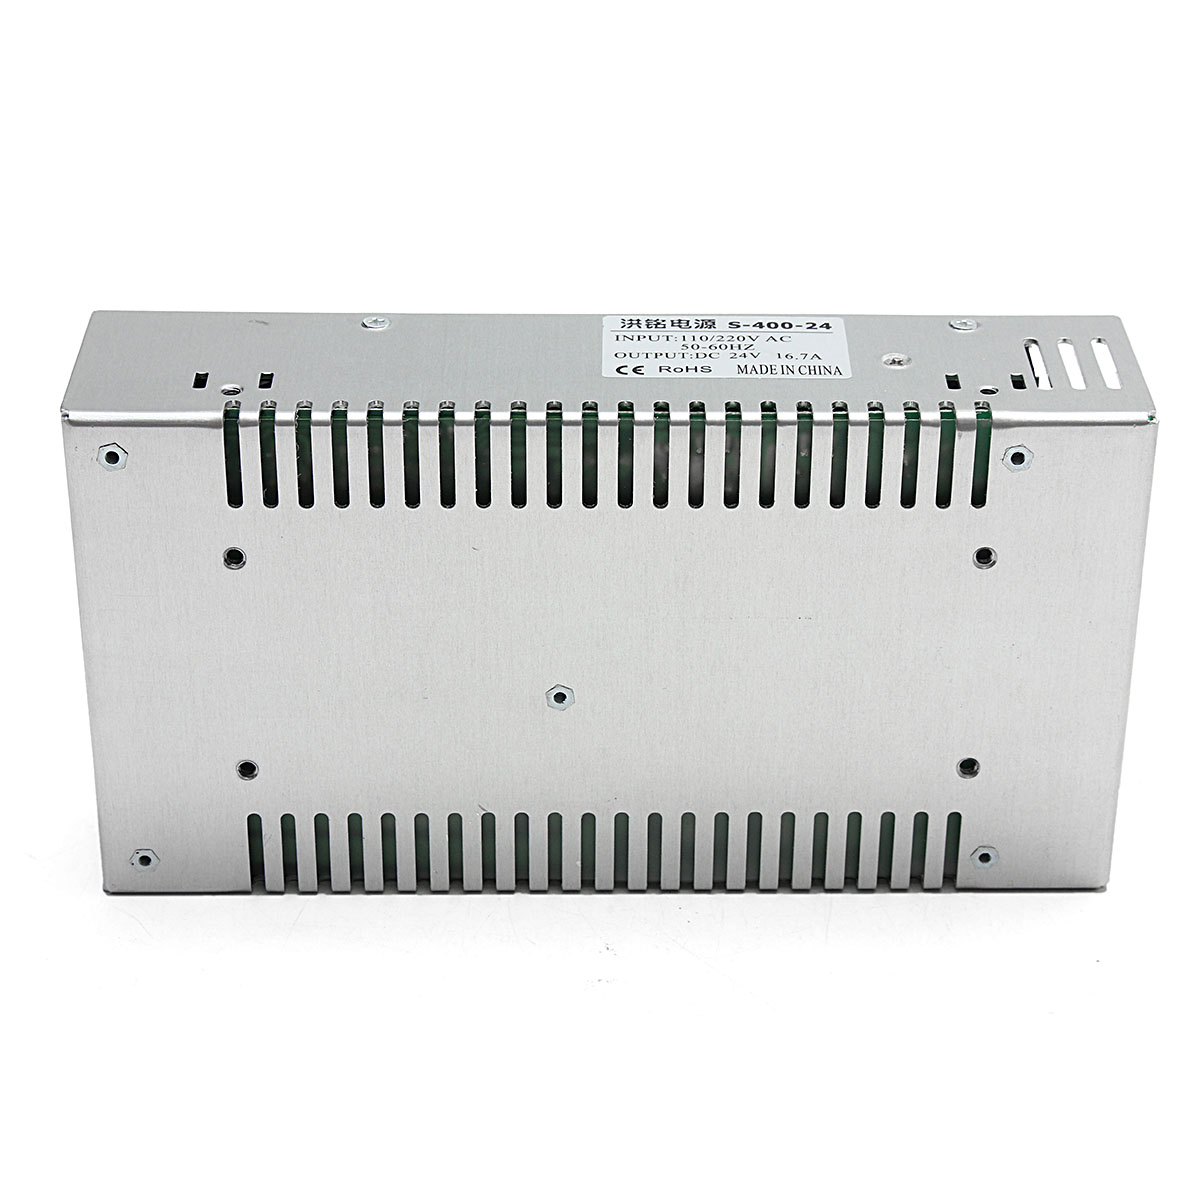 Geekcreitreg-AC-110-240V-Input-To-DC-24V-17A-400W-Switching-Power-Supply-Driver-Board-1272112-5